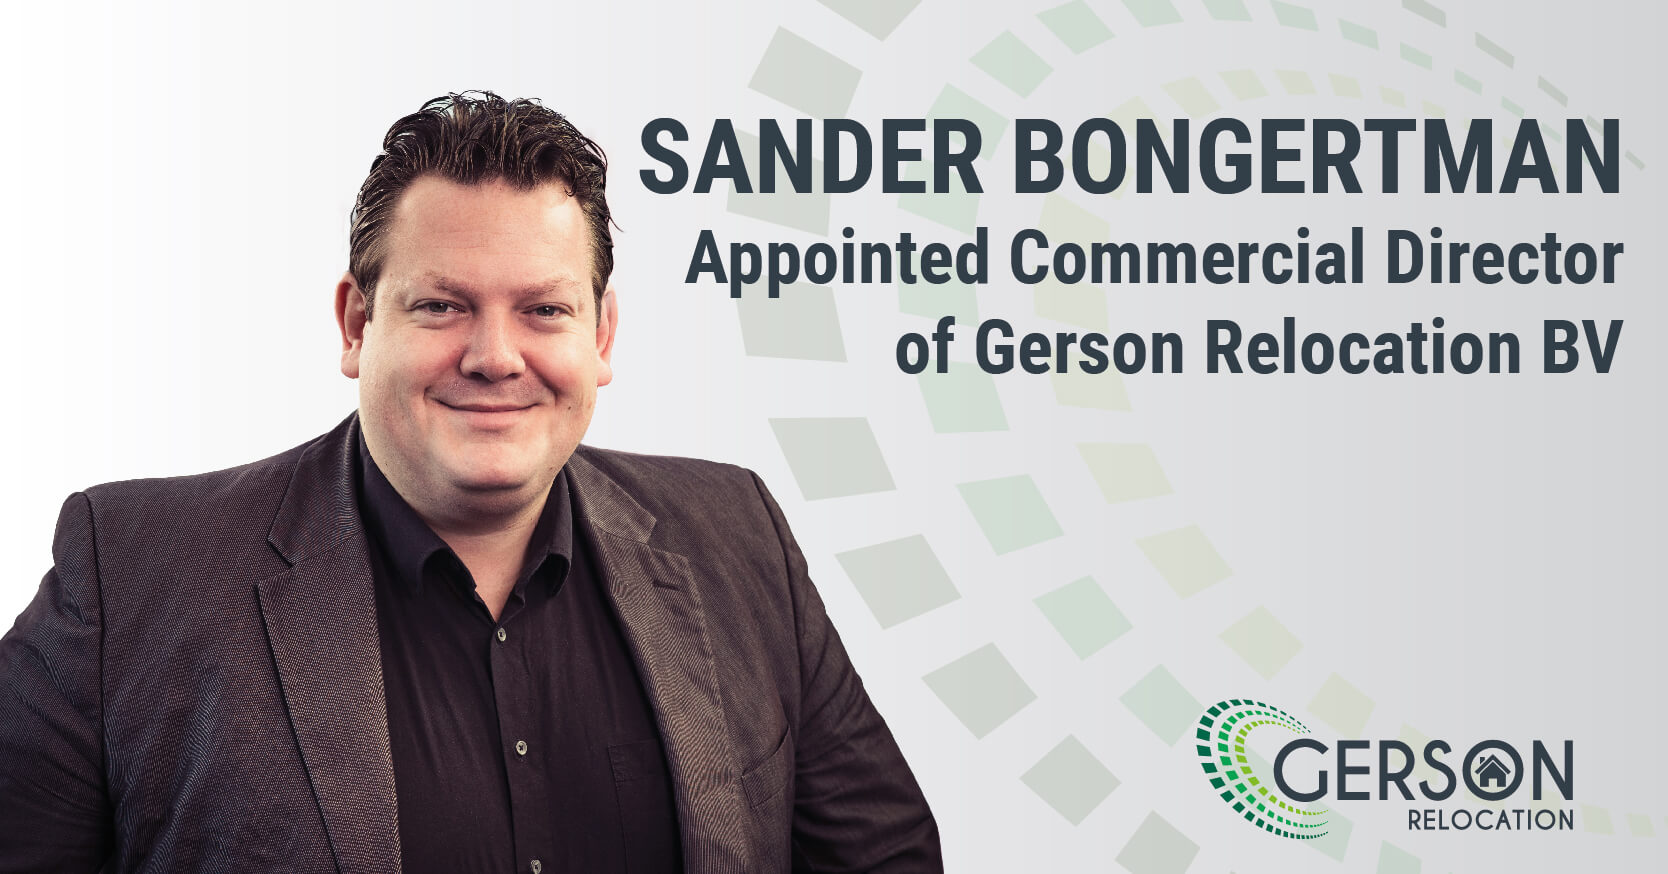 We Are Delighted To Announce That Sander Bongertman Has Been Appointed As Commercial Director Of Gerson Relocation BV.